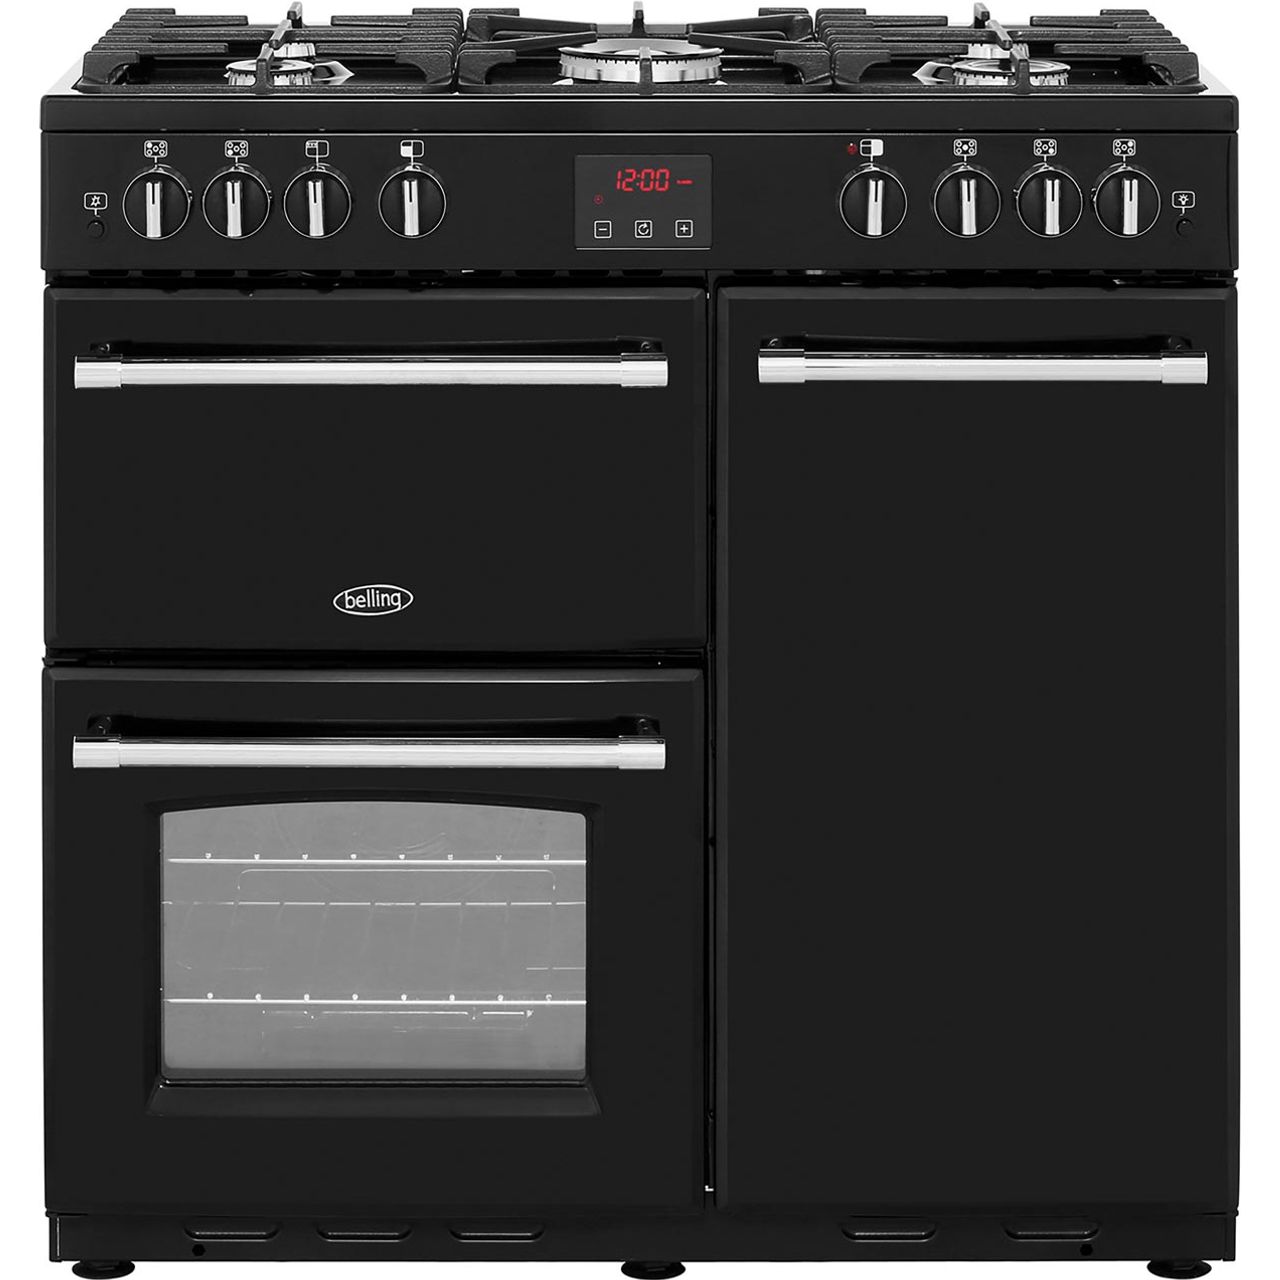 Belling Farmhouse90G 90cm Gas Range Cooker with Electric Fan Oven Review